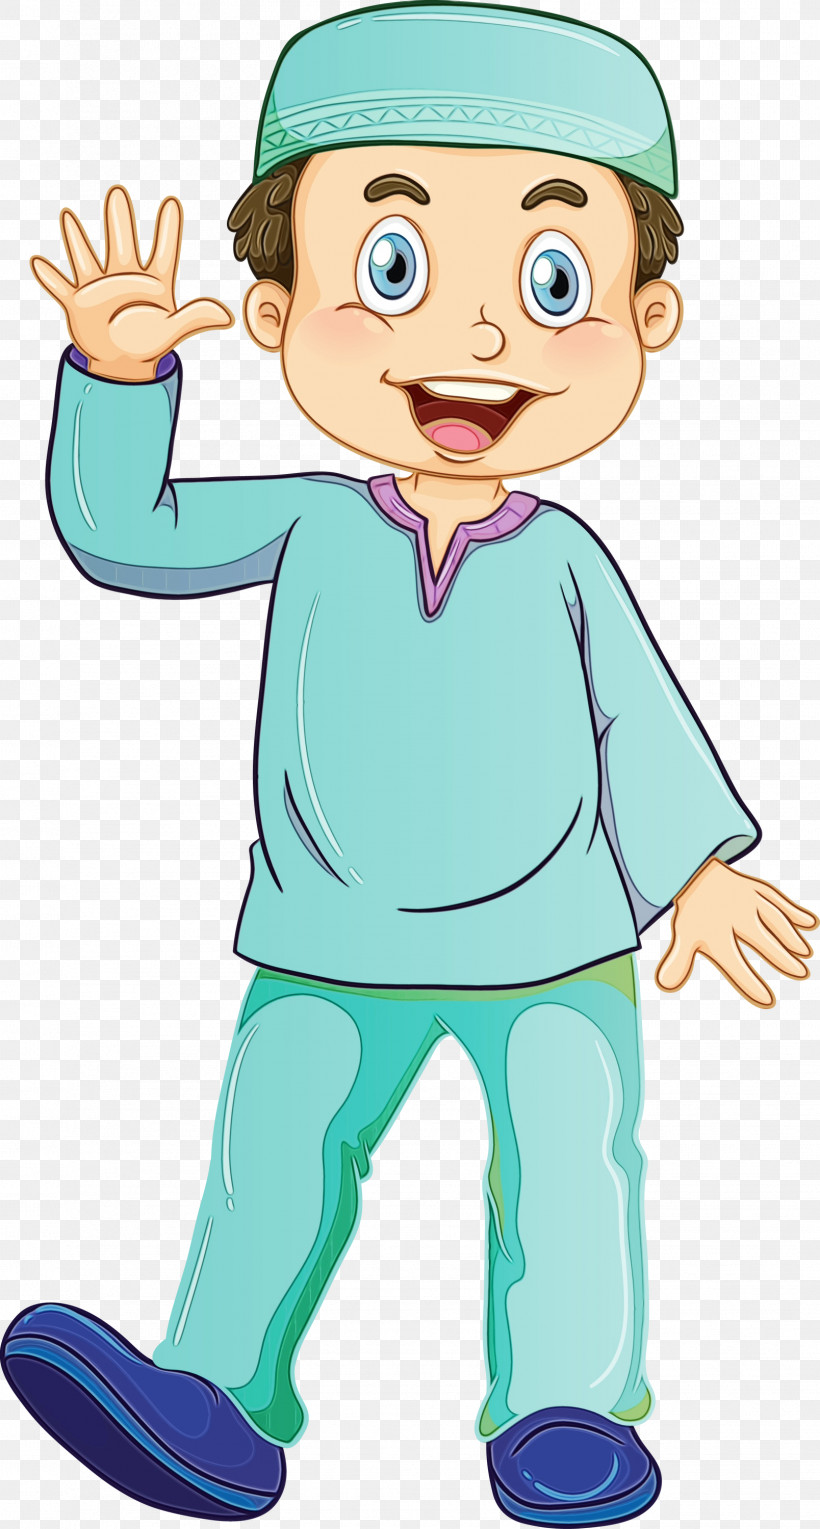 Cartoon Finger Child Thumb Gesture, PNG, 1608x3000px, Muslim People, Cartoon, Child, Finger, Gesture Download Free